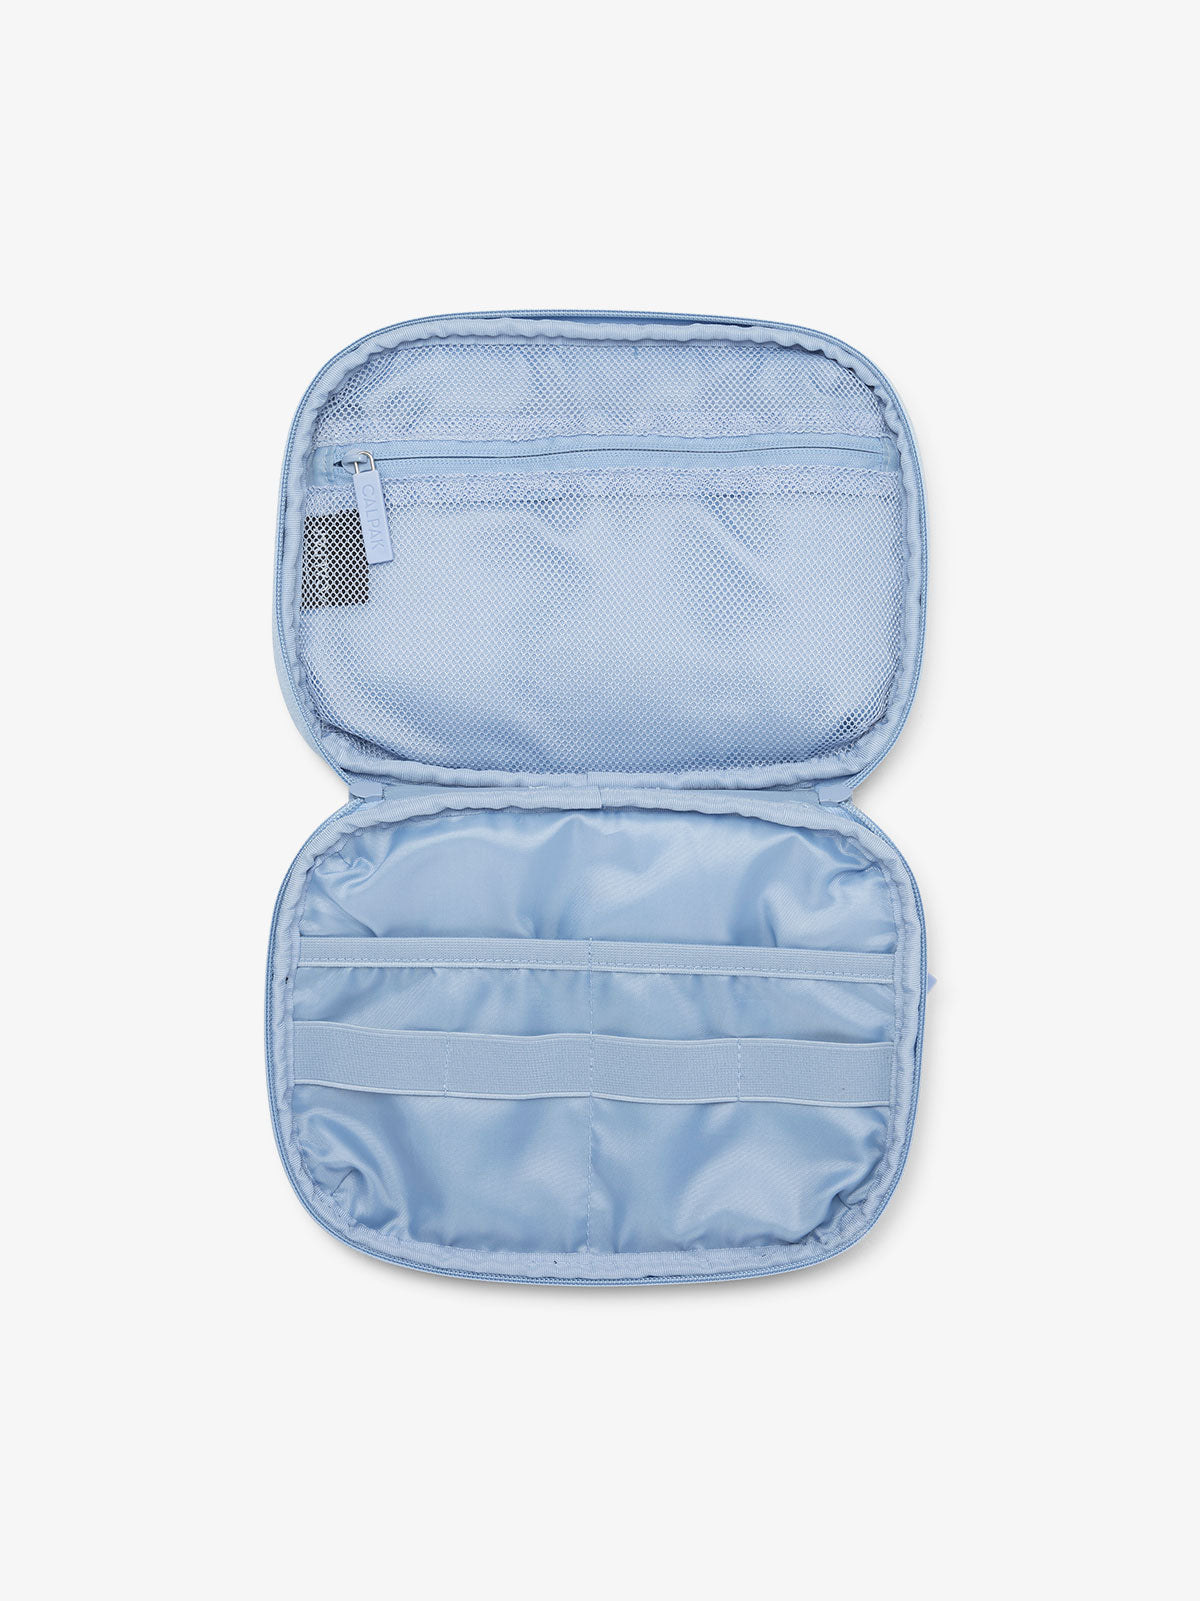 CALPAK tech and electronics organizer for travel in sky blue